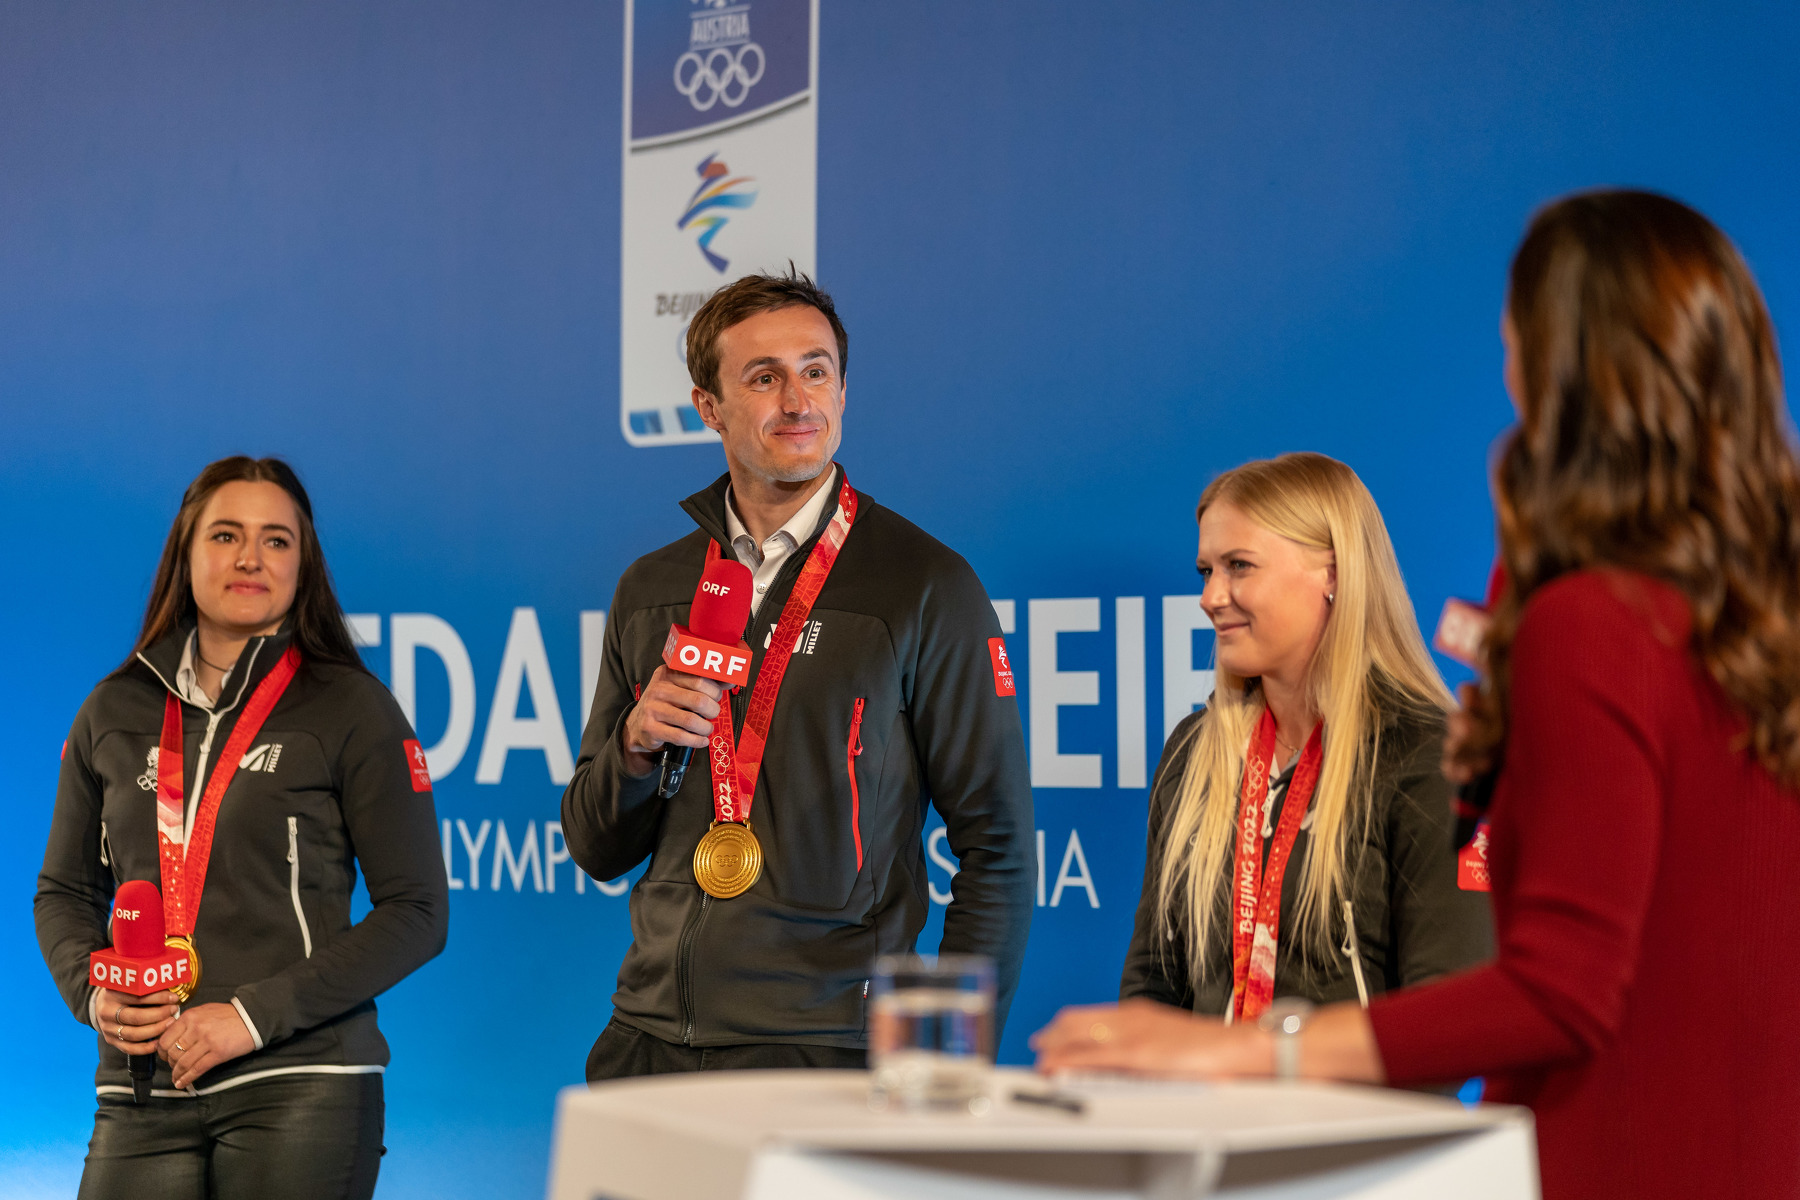 VIENNA,AUSTRIA,22.FEB.22 - OLYMPICS - Winter Olympic Games Beijing 2022, Olympic Team Austria, medal celebration. Image shows Katharina Huber, Stefan Brennsteiner and Katharina Truppe (AUT). Photo: GEPA pictures/ Johannes Friedl